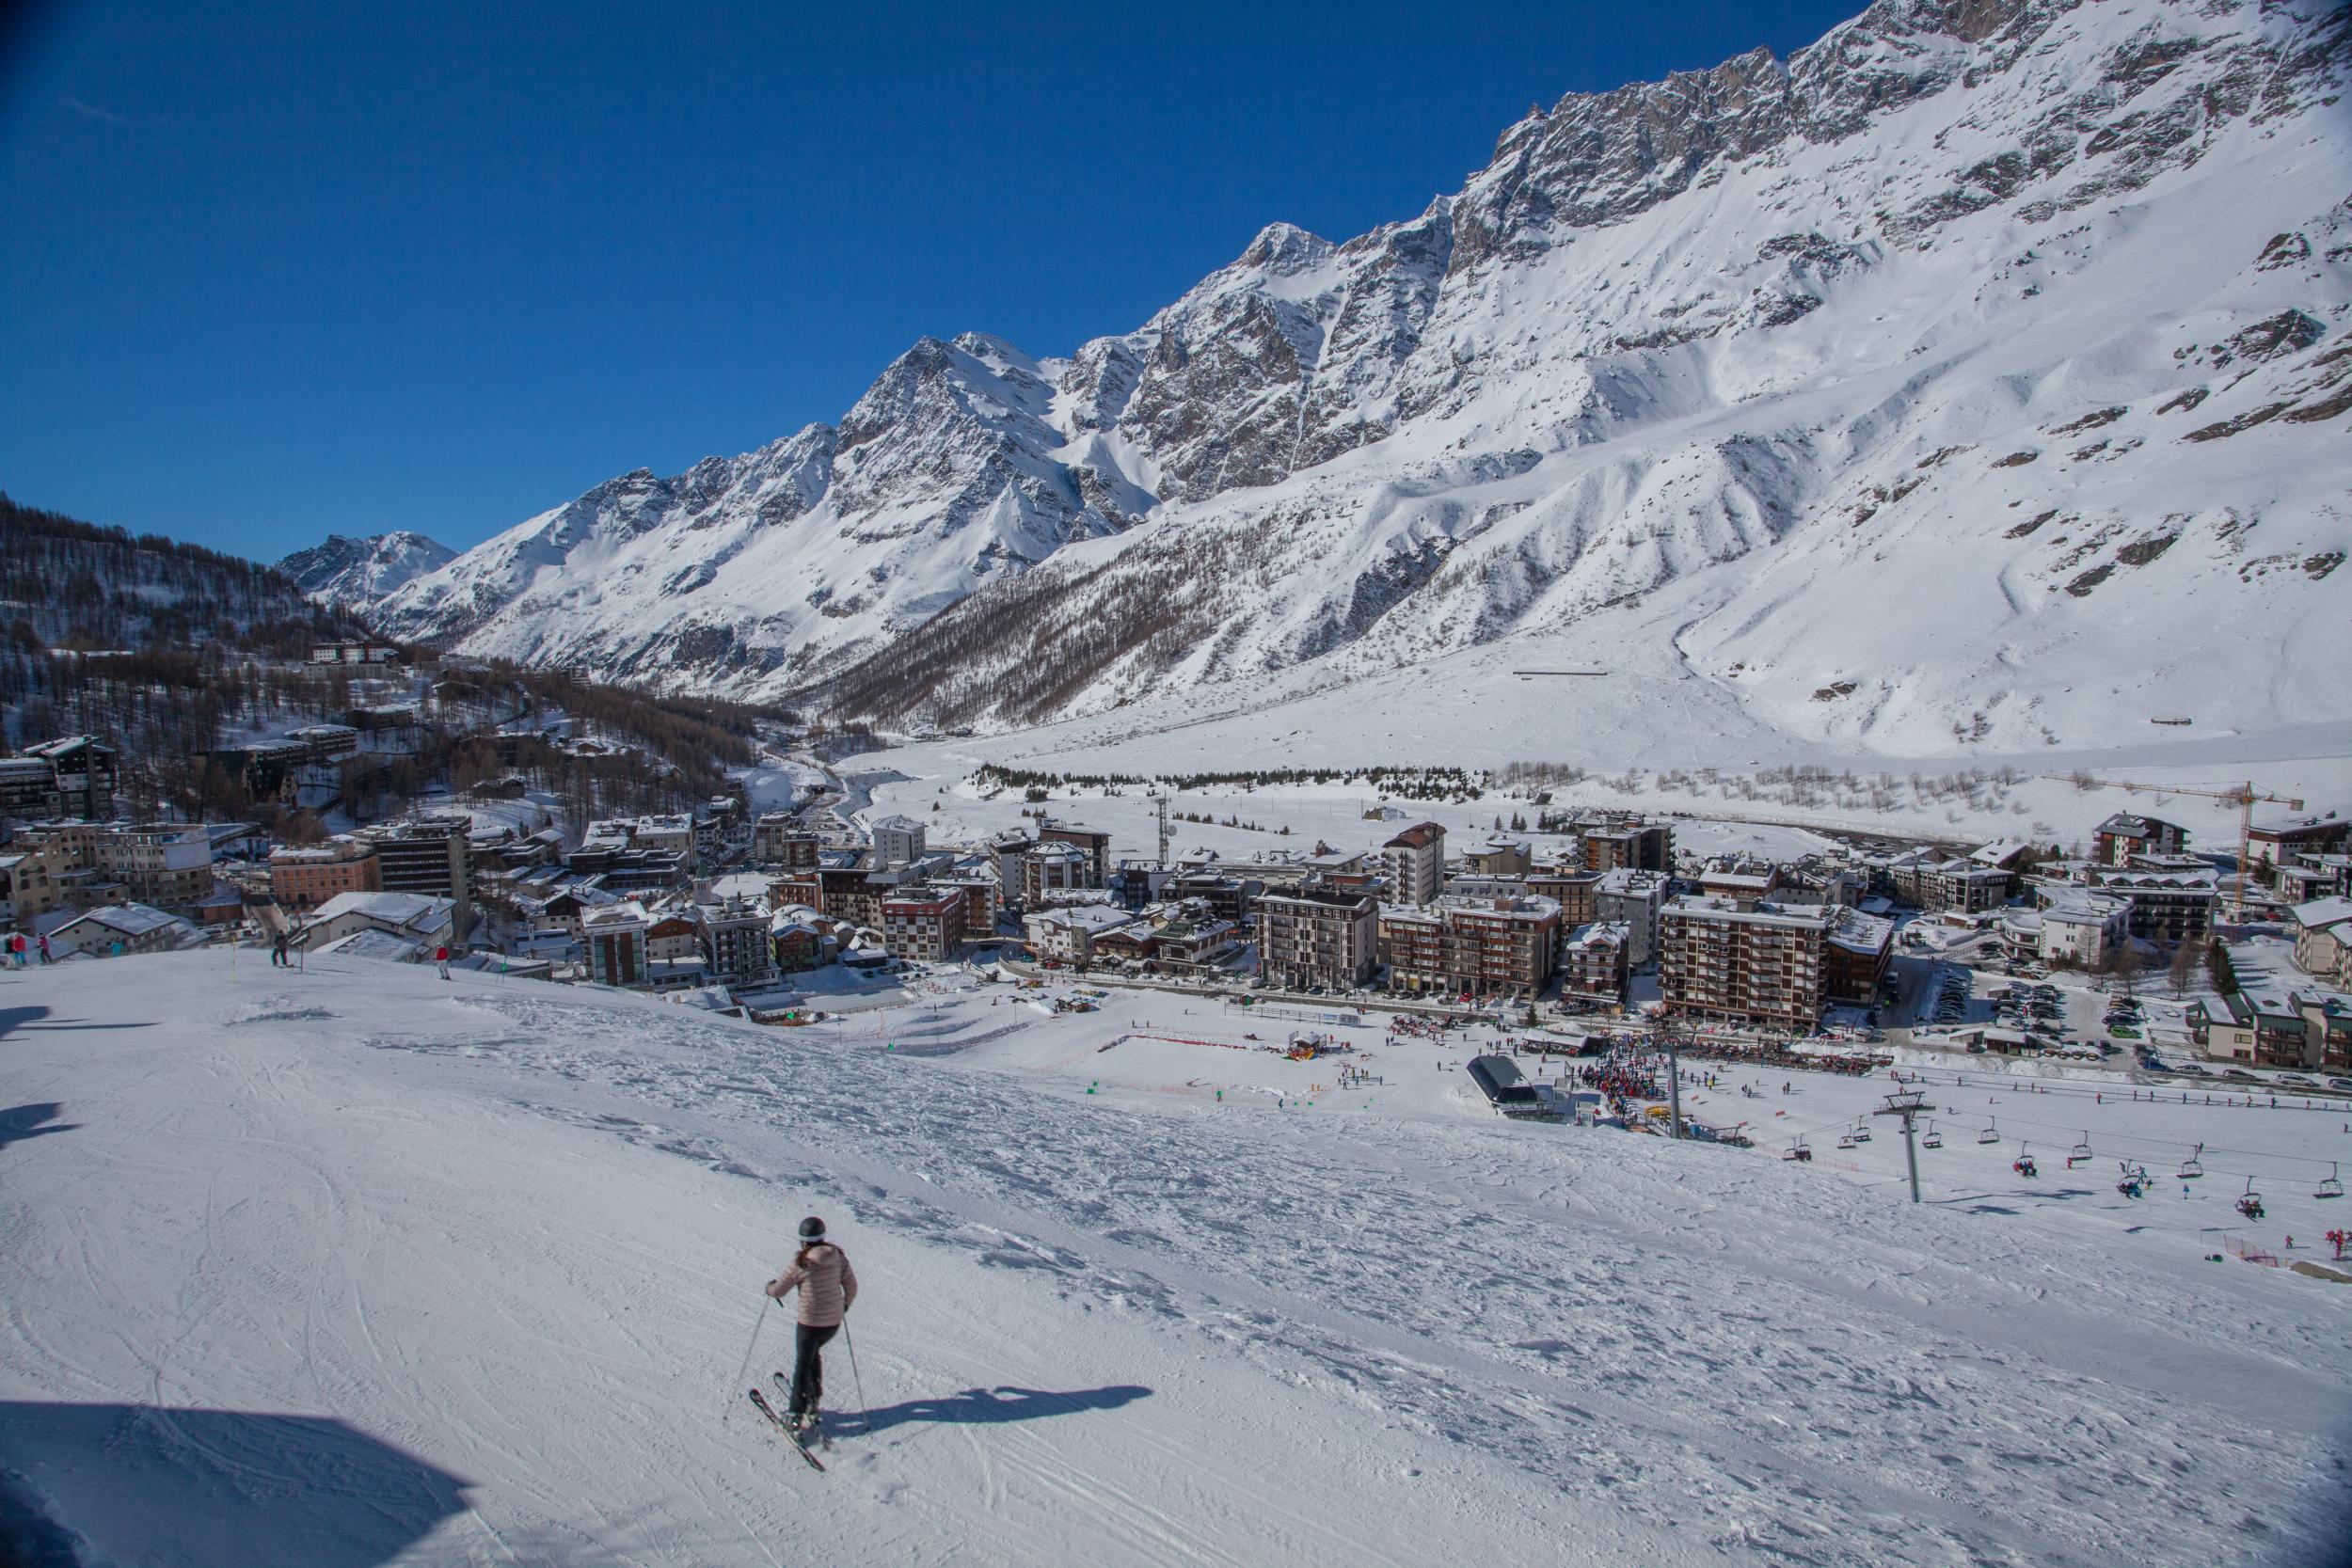 Cervinia is one of Italy’s highest resorts